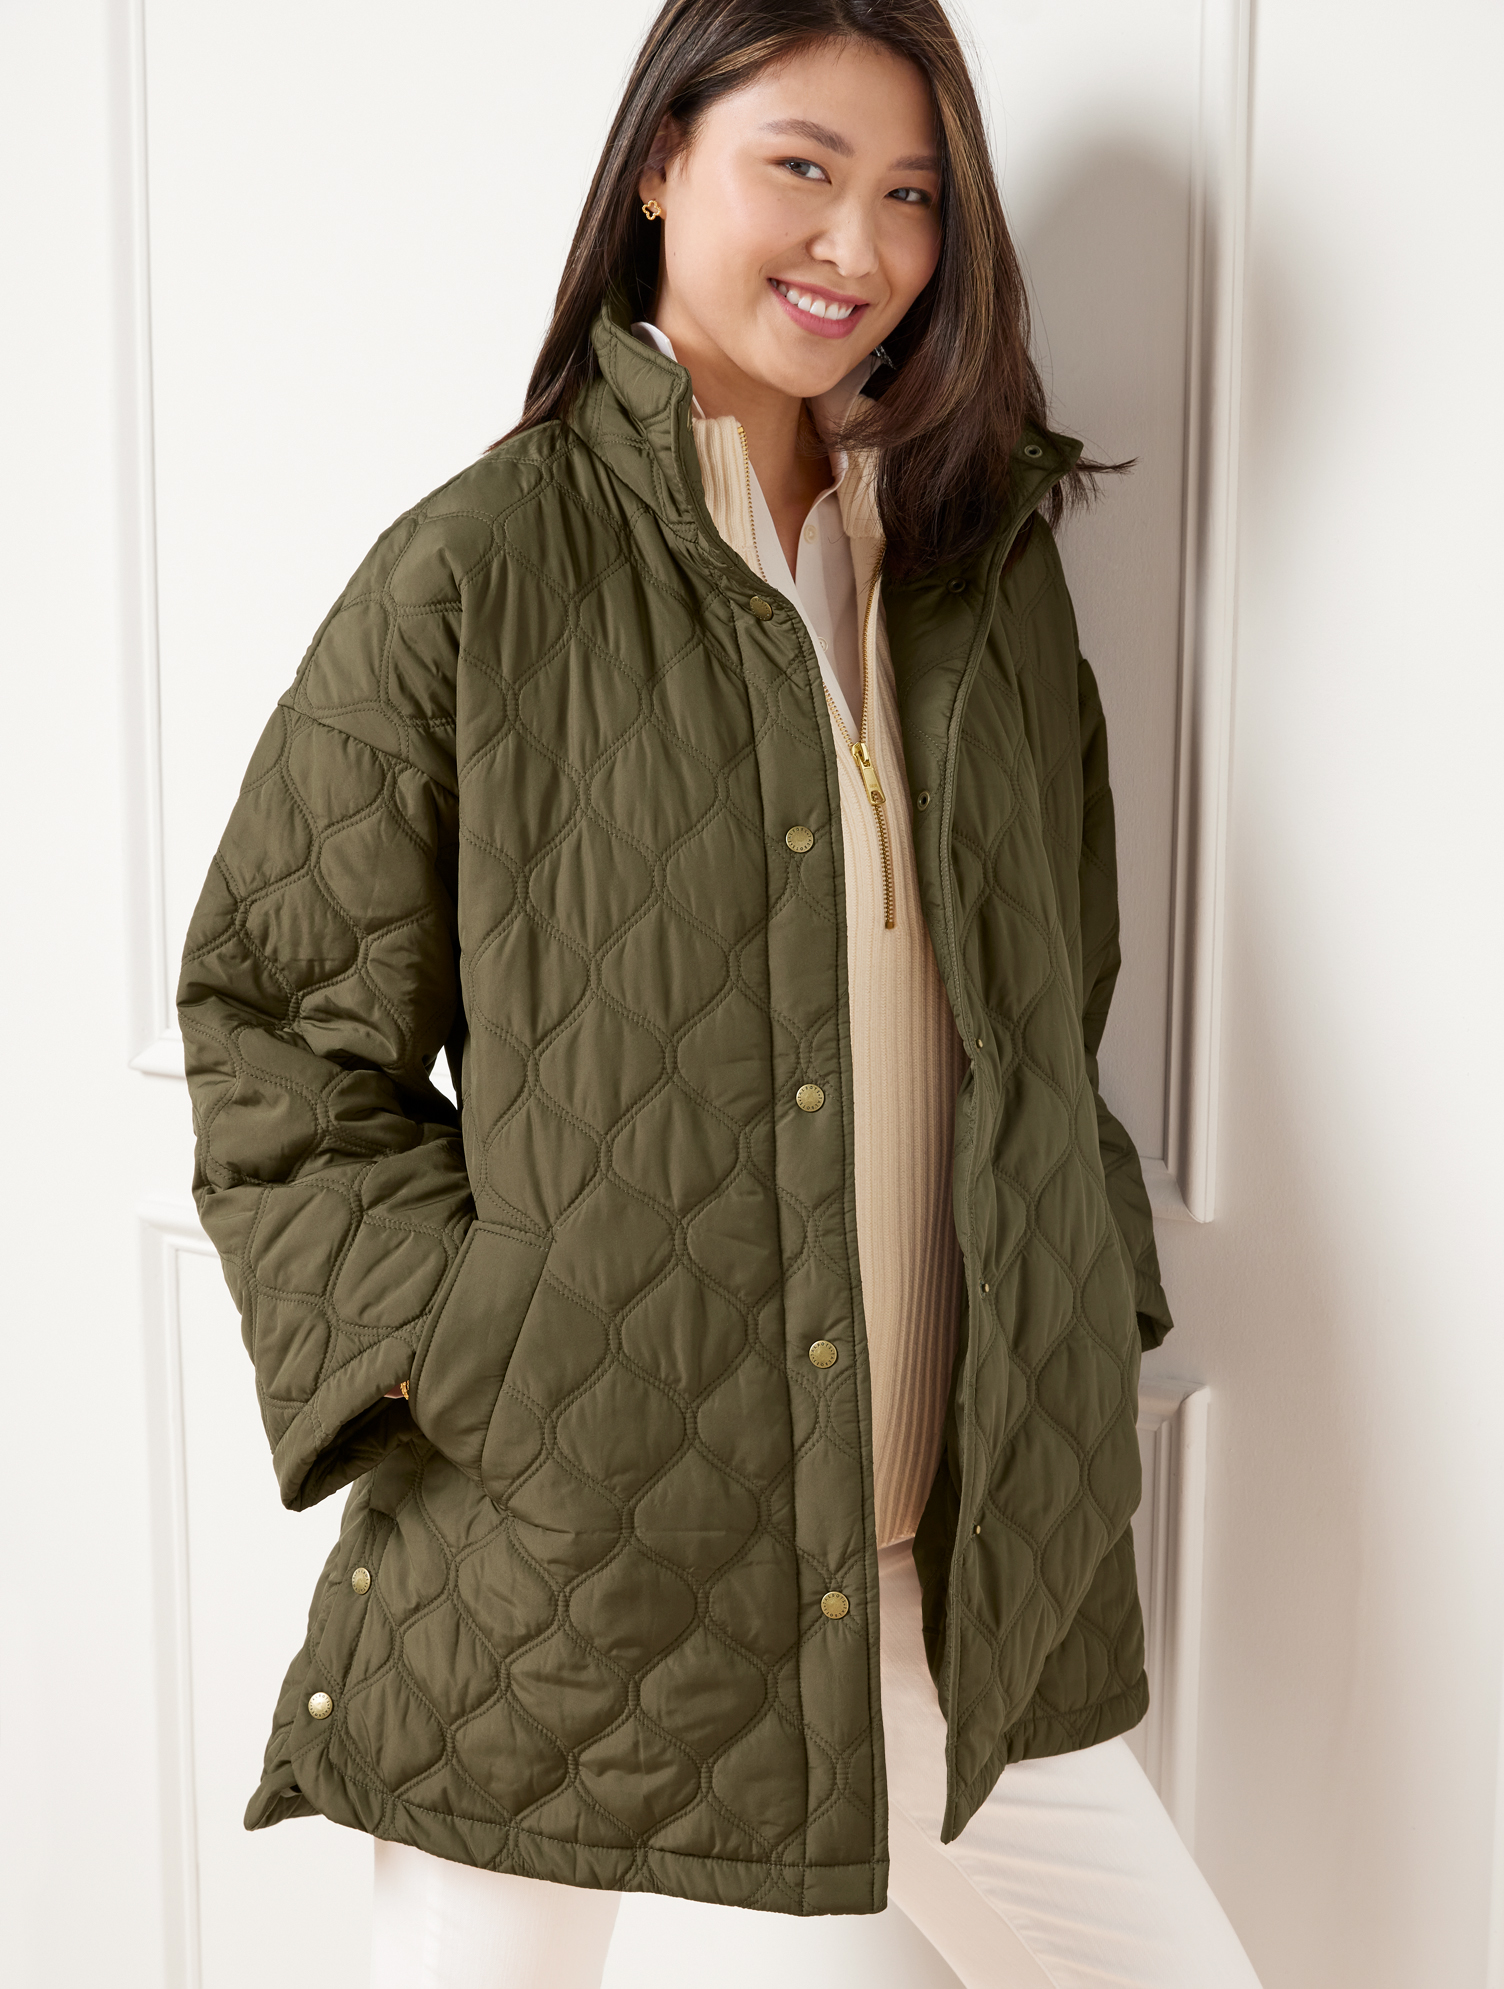 Talbots Plus Size - Quilted Capelet - Deep Moss - 3x